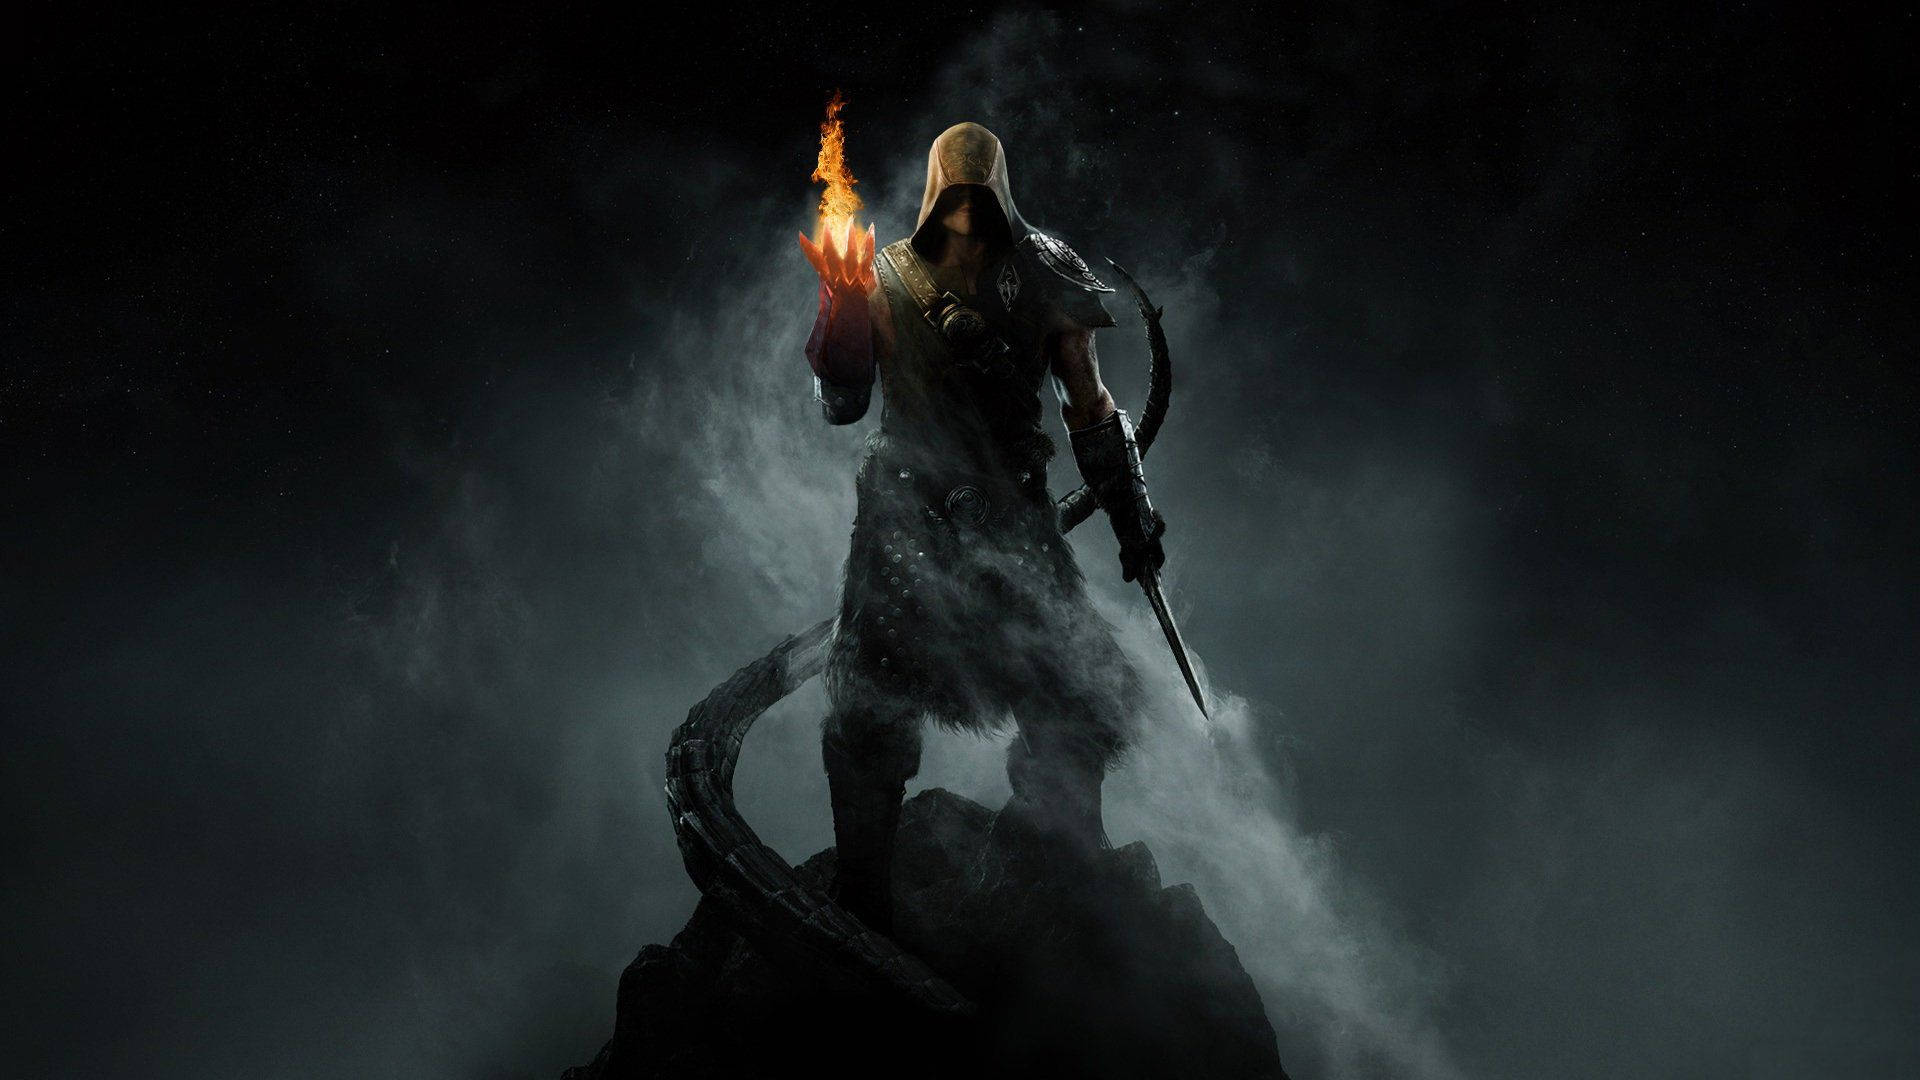 Skyrim Ultra HD Dragonborn With Flame Hands Wallpaper